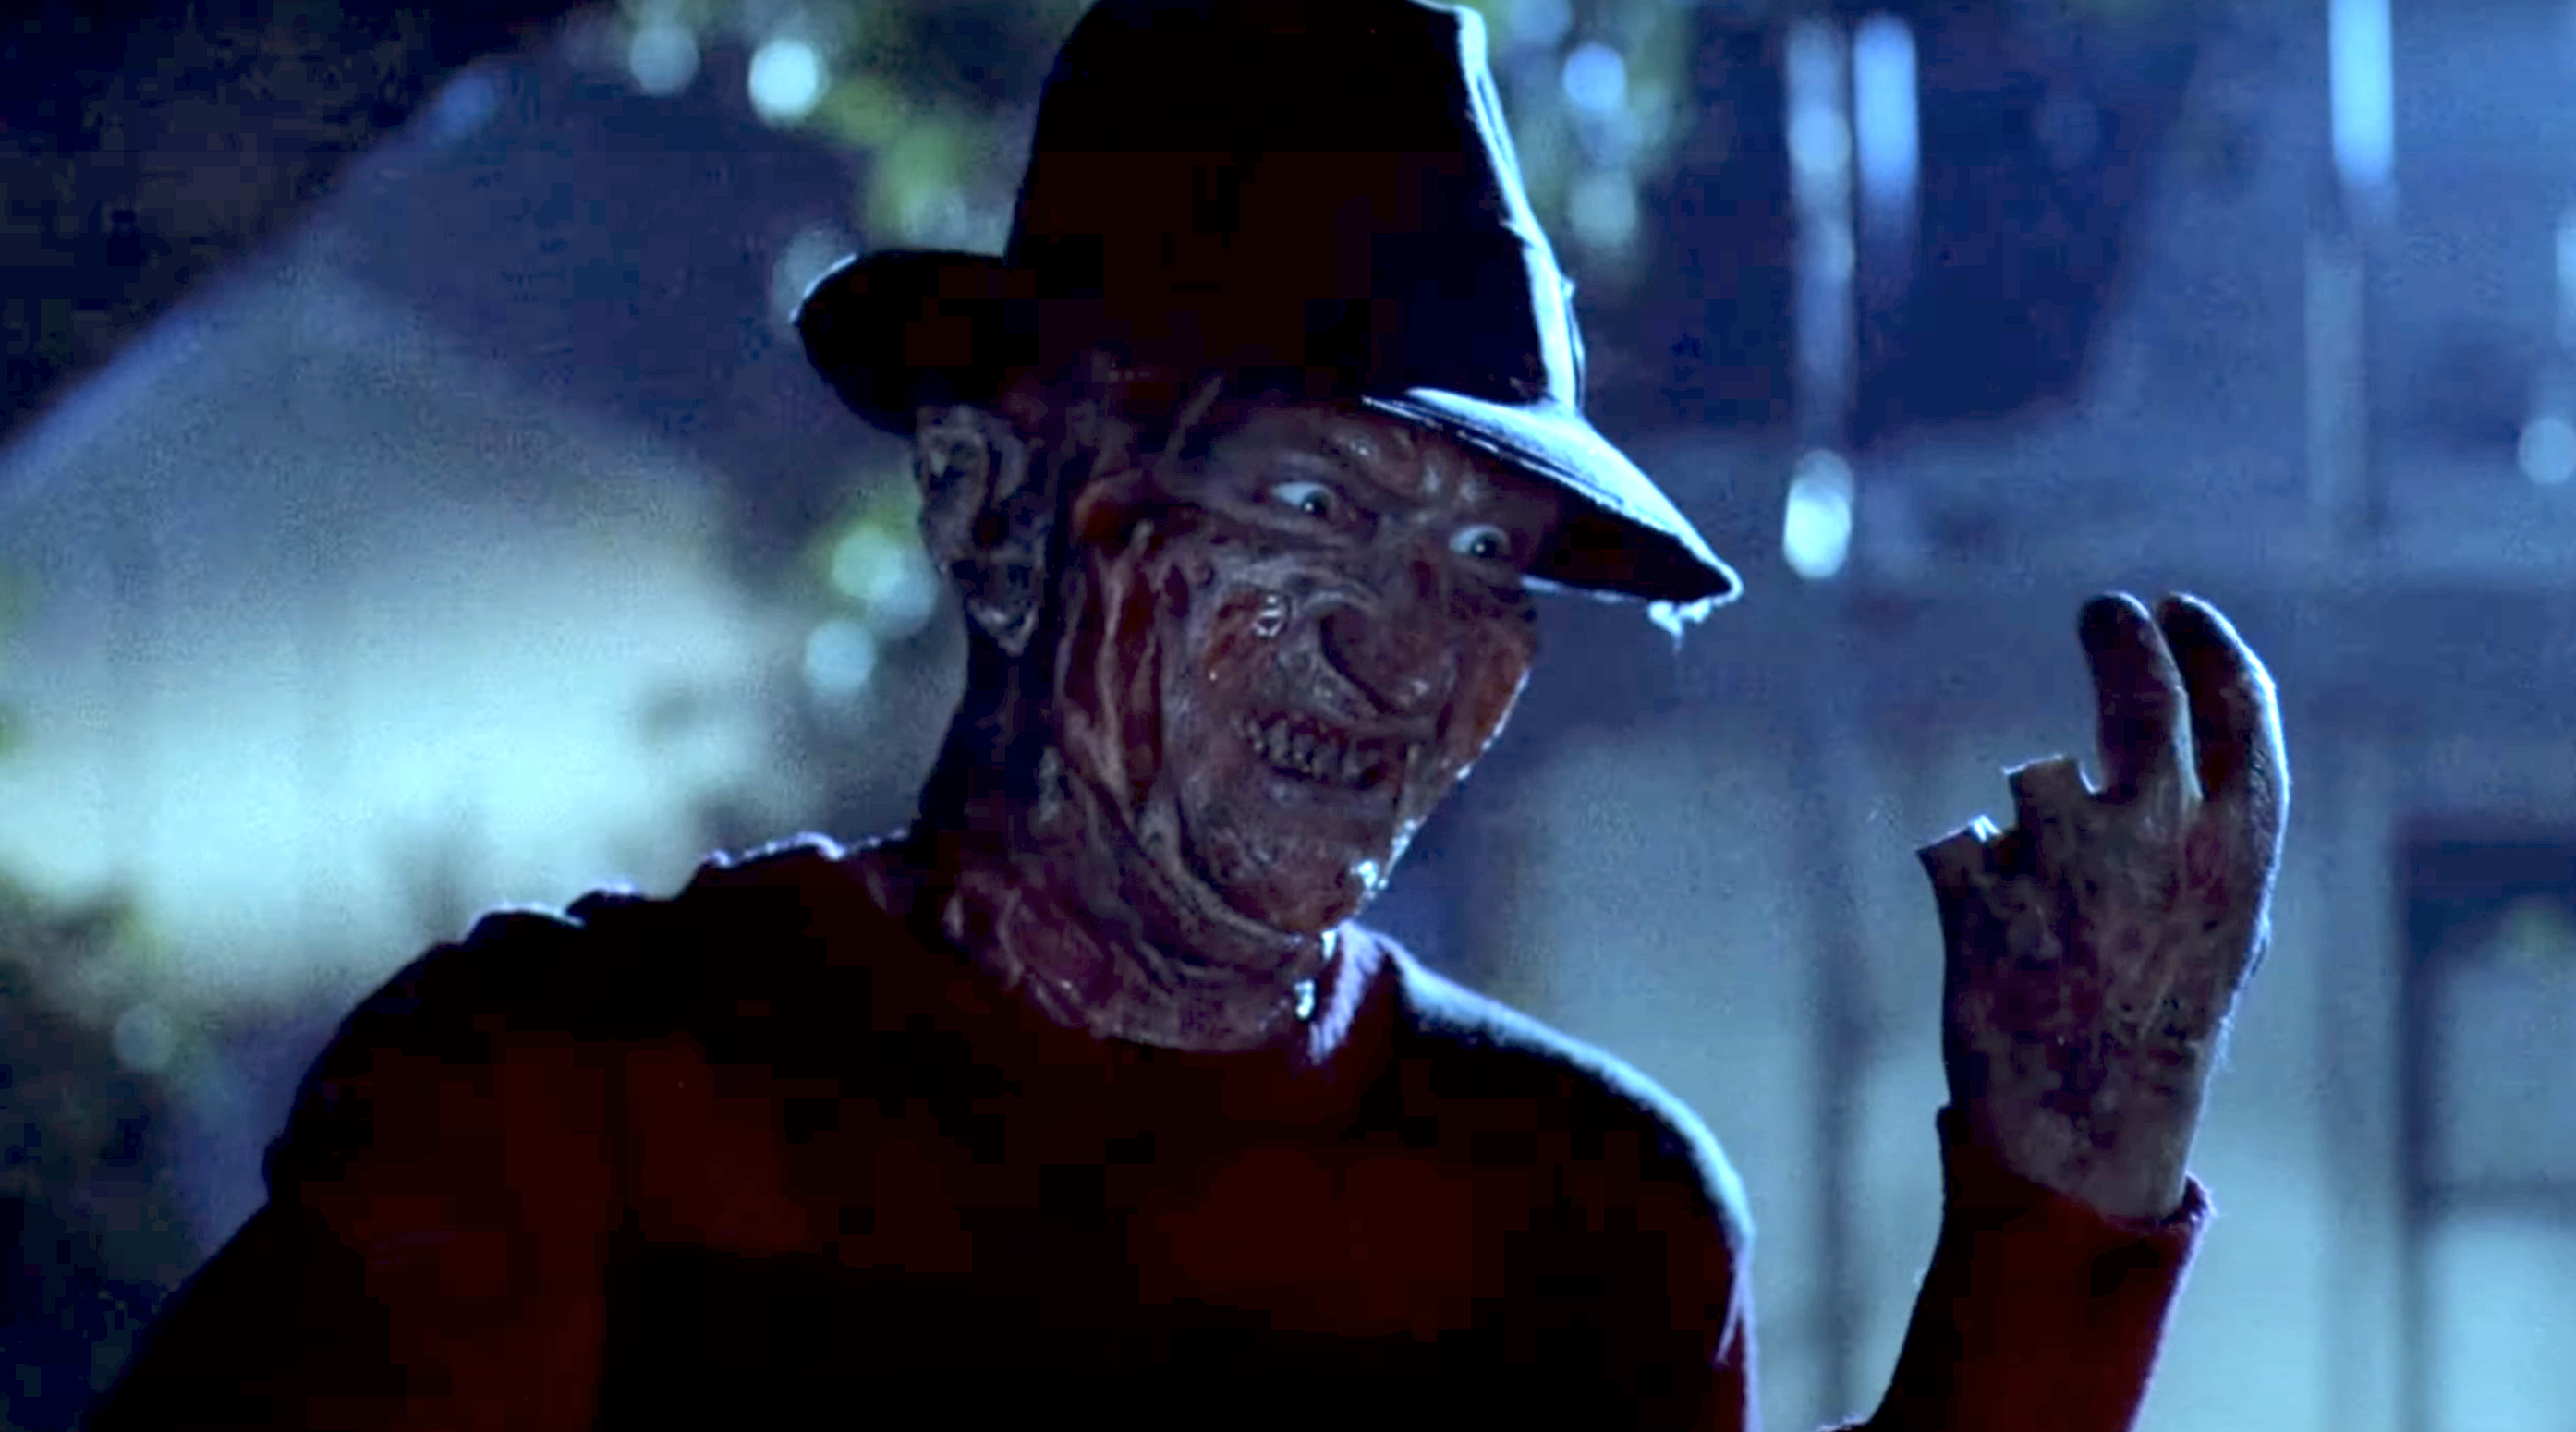 Screenshot from &quot;A Nightmare on Elm Street&quot;